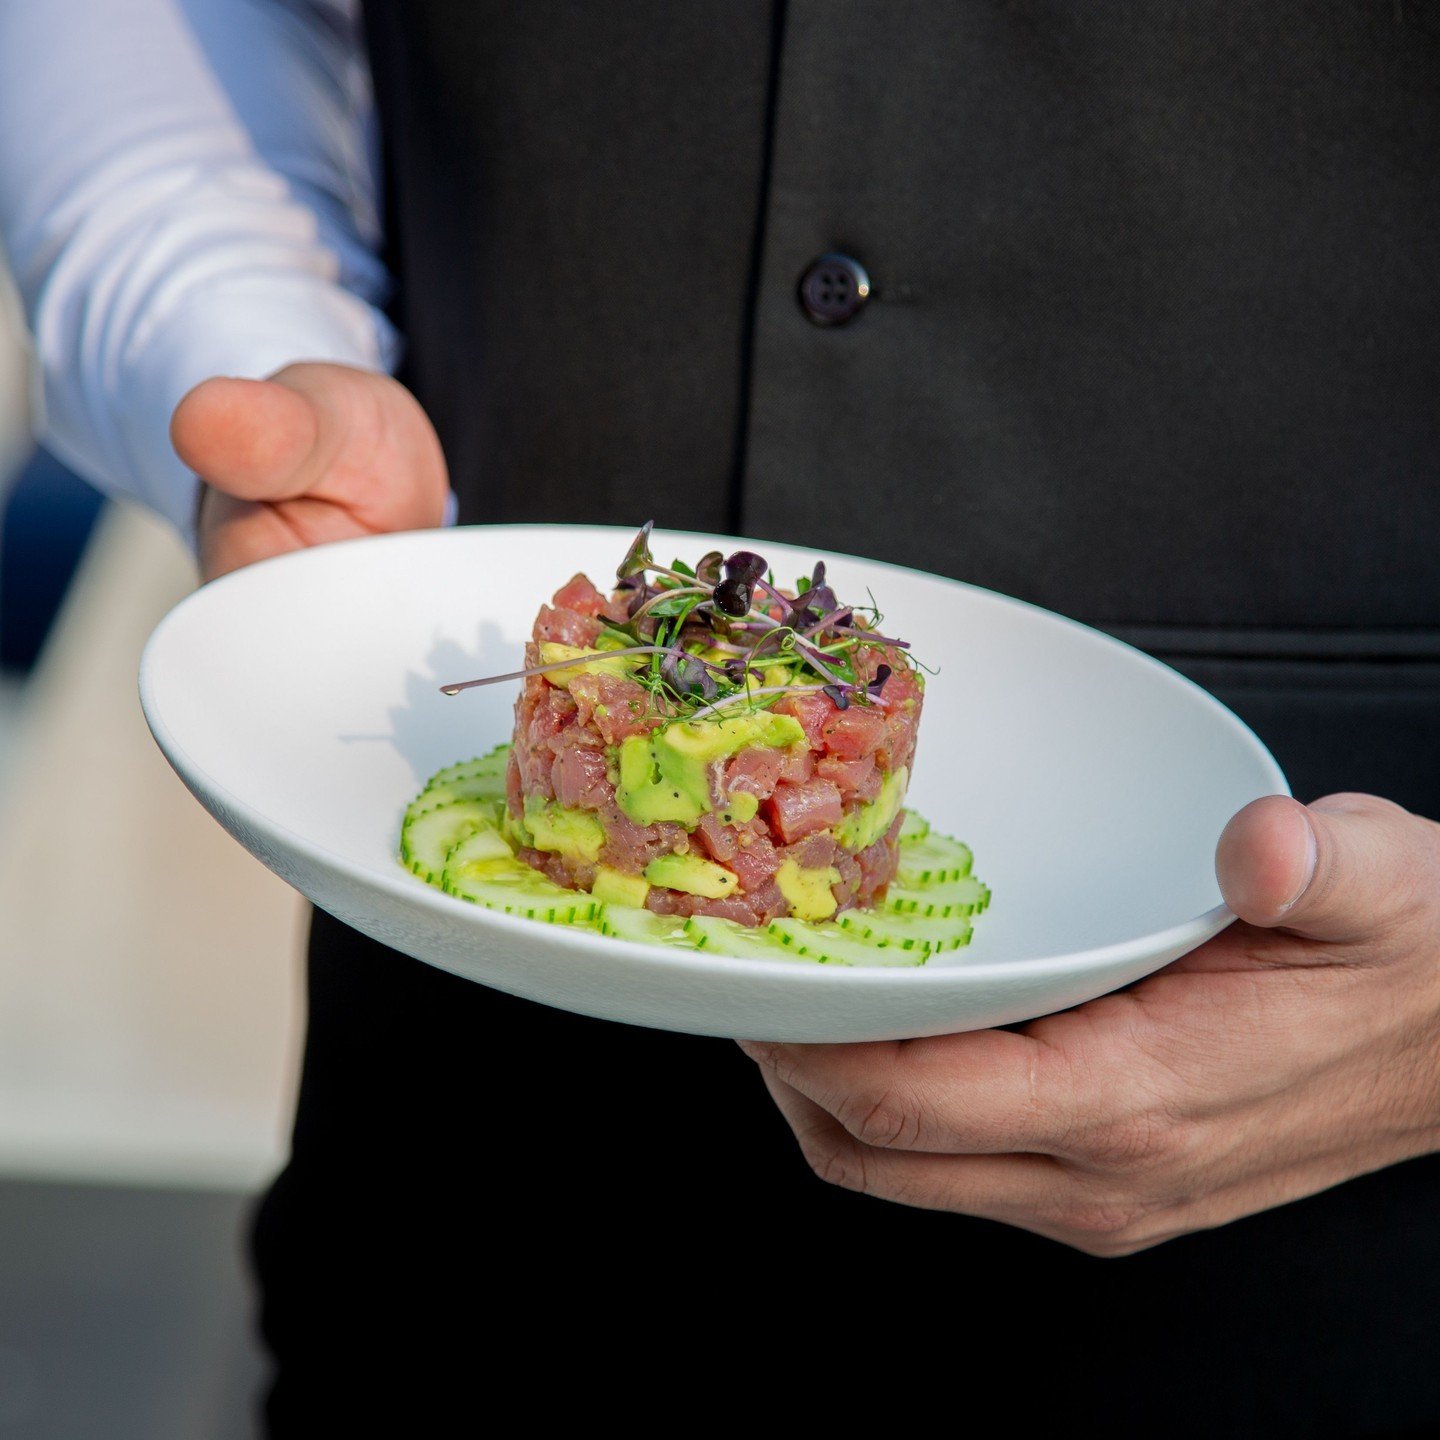 Tartare Di Tonno Rosso: a fresh and zesty blend to delight your tastebuds.

To reserve, tap the link in our bio

#Oliveto #EnhanceYourSenses #Italian #Restaurant #Bahrain #KSA #Khobar #Dammam #Kuwait #Lounge #Livemusic #Foodie